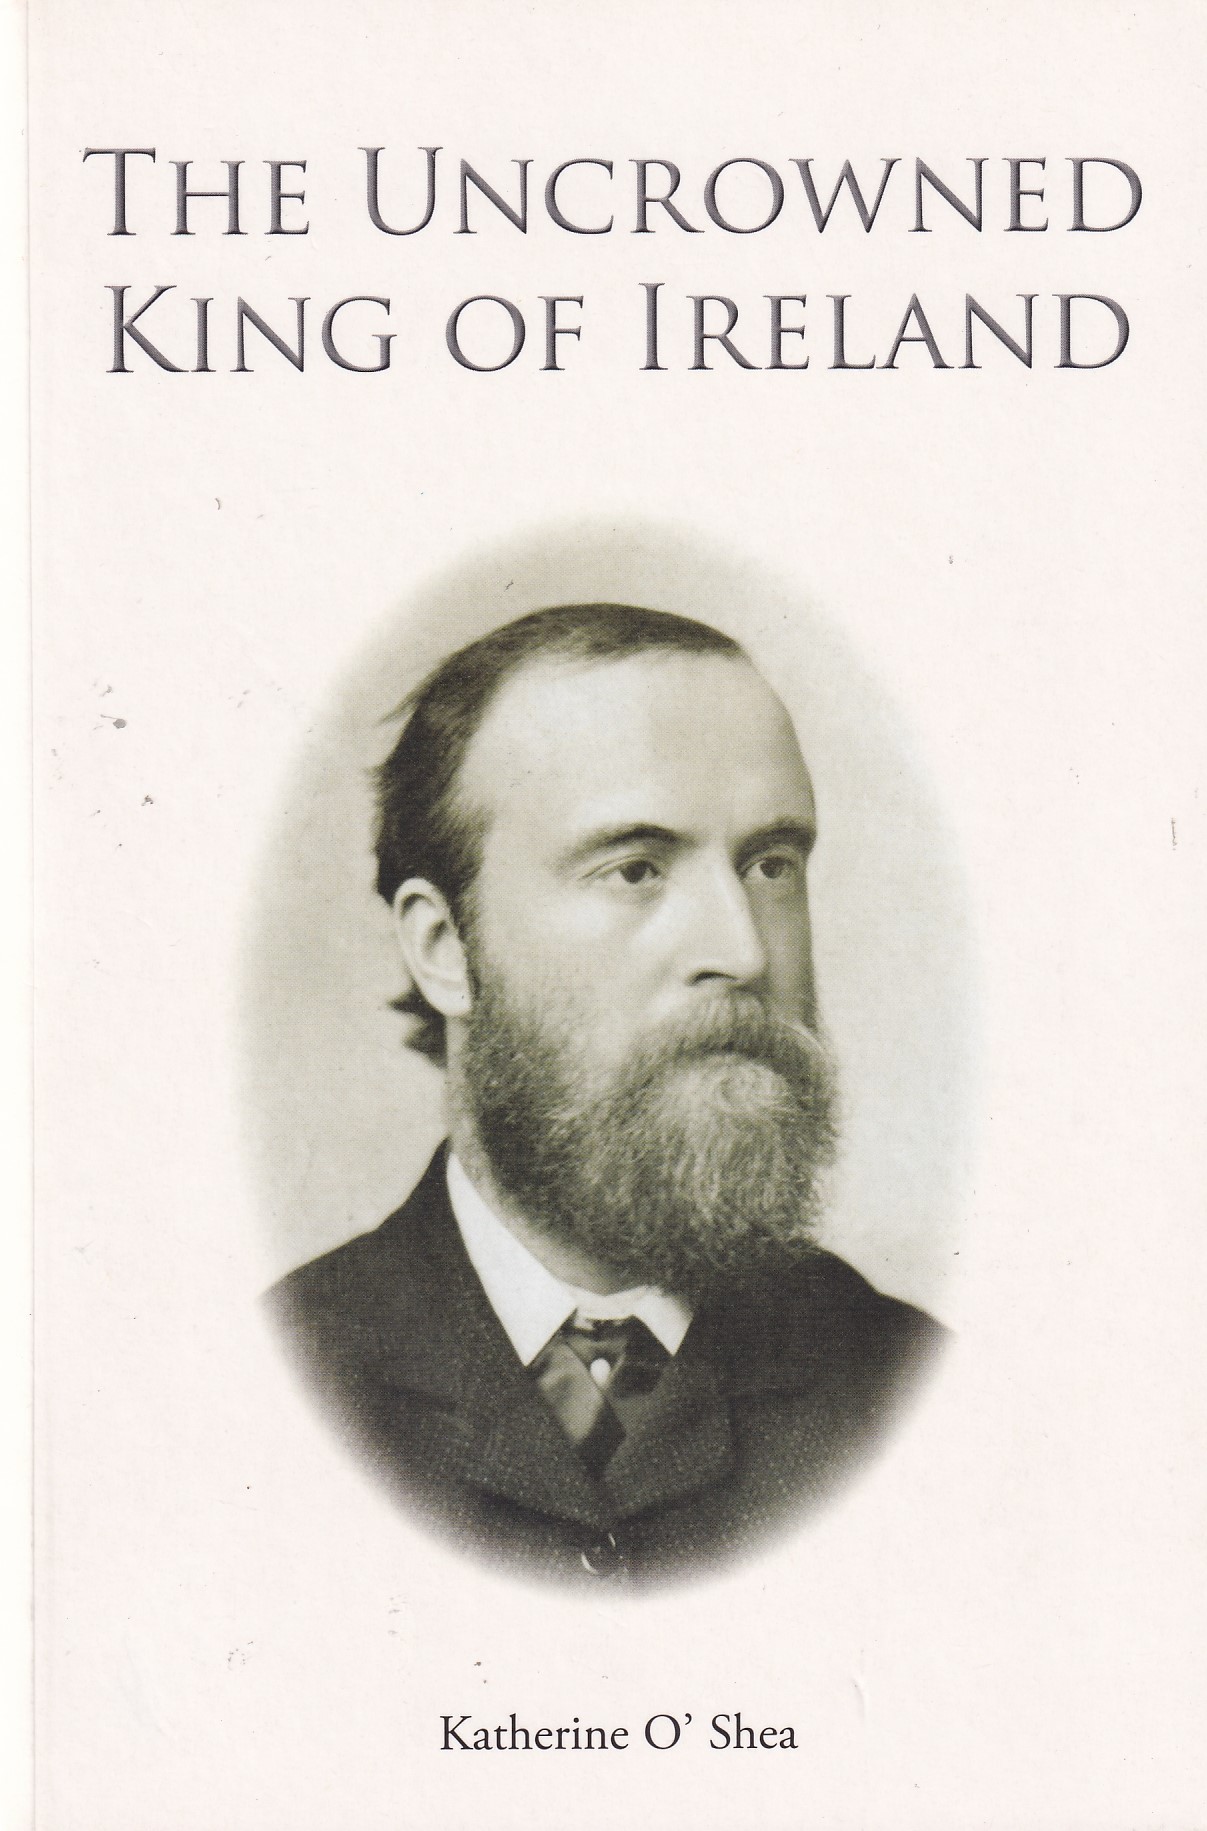 Parnell – The Uncrowned King of Ireland | Katherine O'Shea | Charlie Byrne's